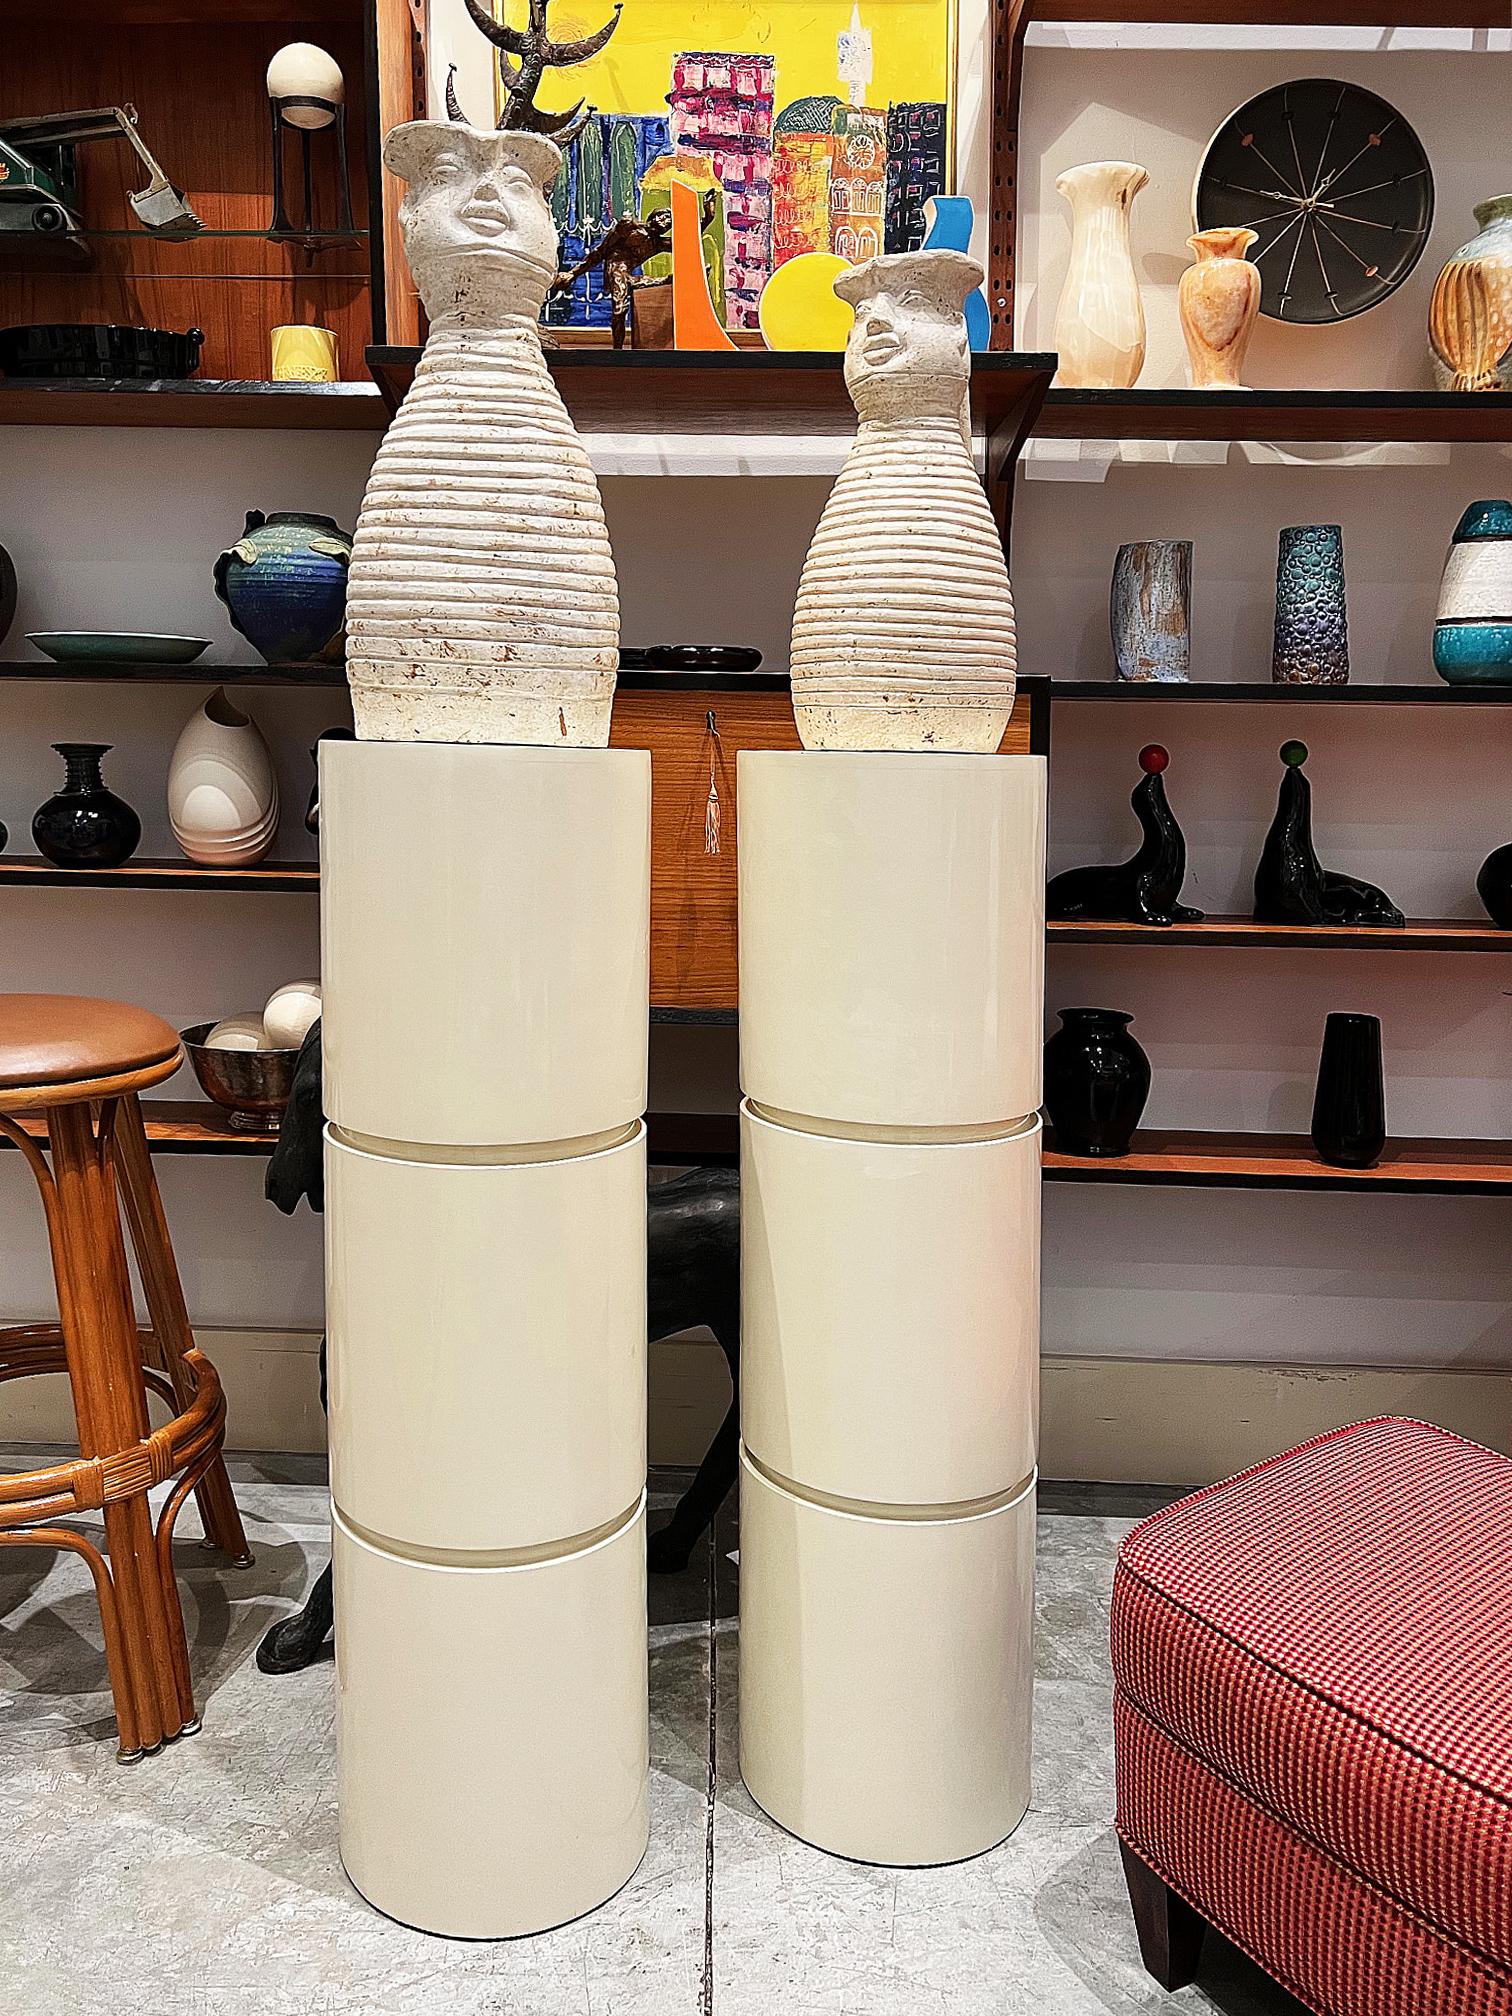 1980s Mod lacquered wood pedestals, custom-made pair

Offered for sale is pair of substantial 1980s Mod wood pedestals with reveal details that are ideal for displaying art or objects. We believe that these were custom-made from wood and finished